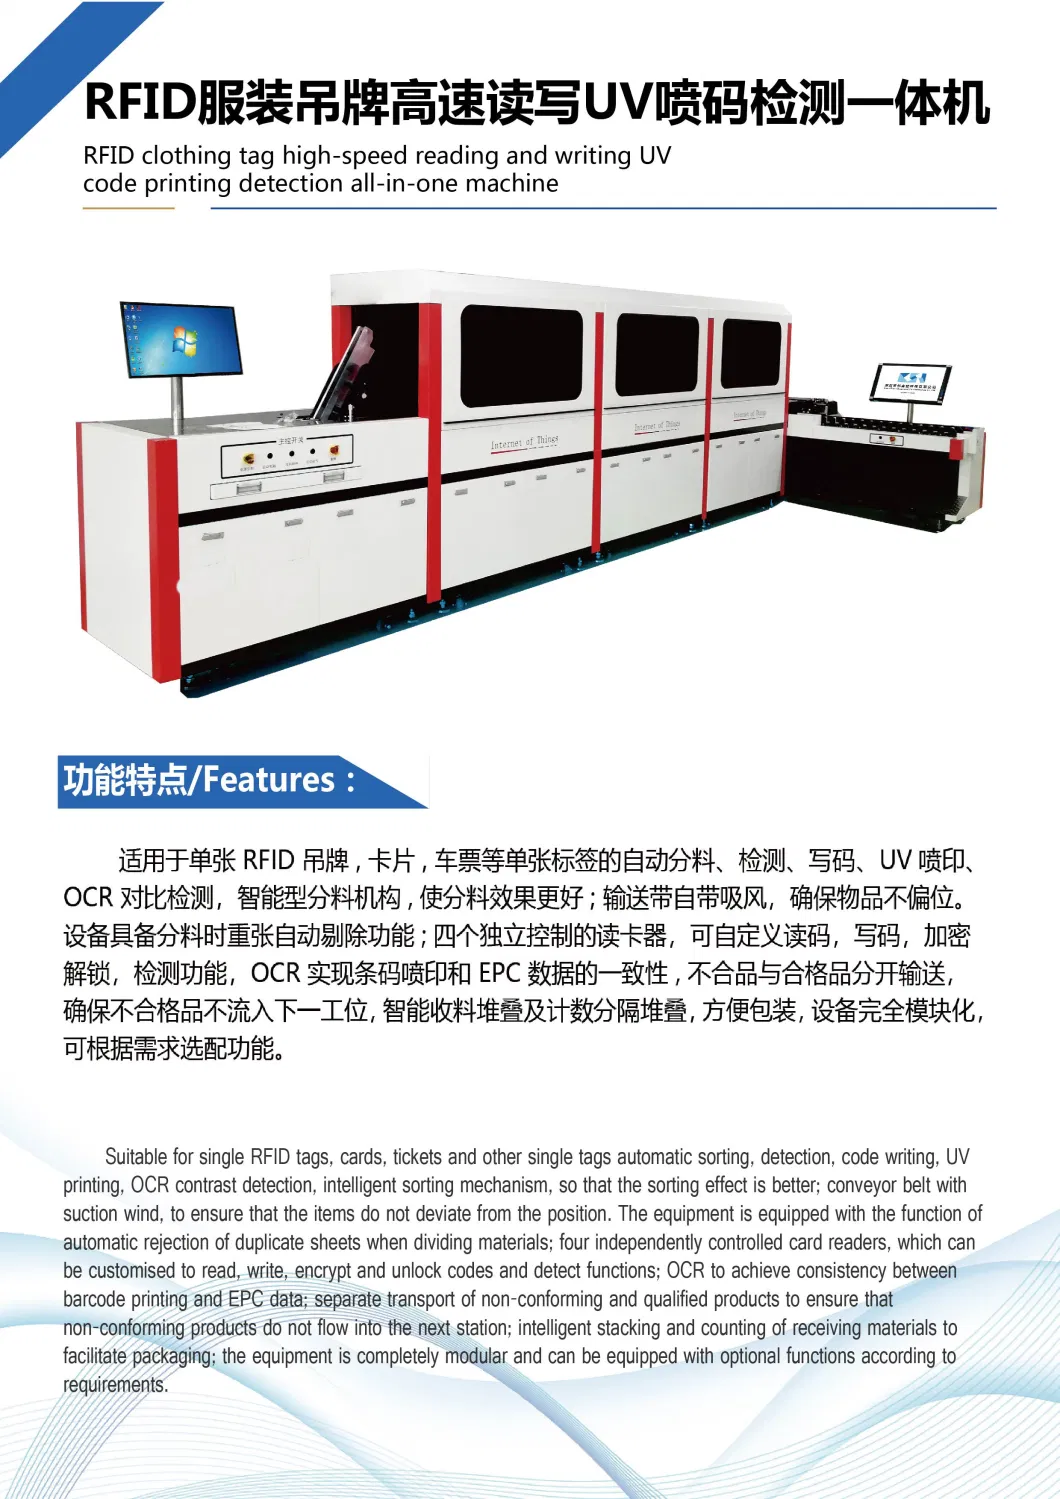 Two-Dimensional Code Serial Number RFID Clothes Hang Tag Printer